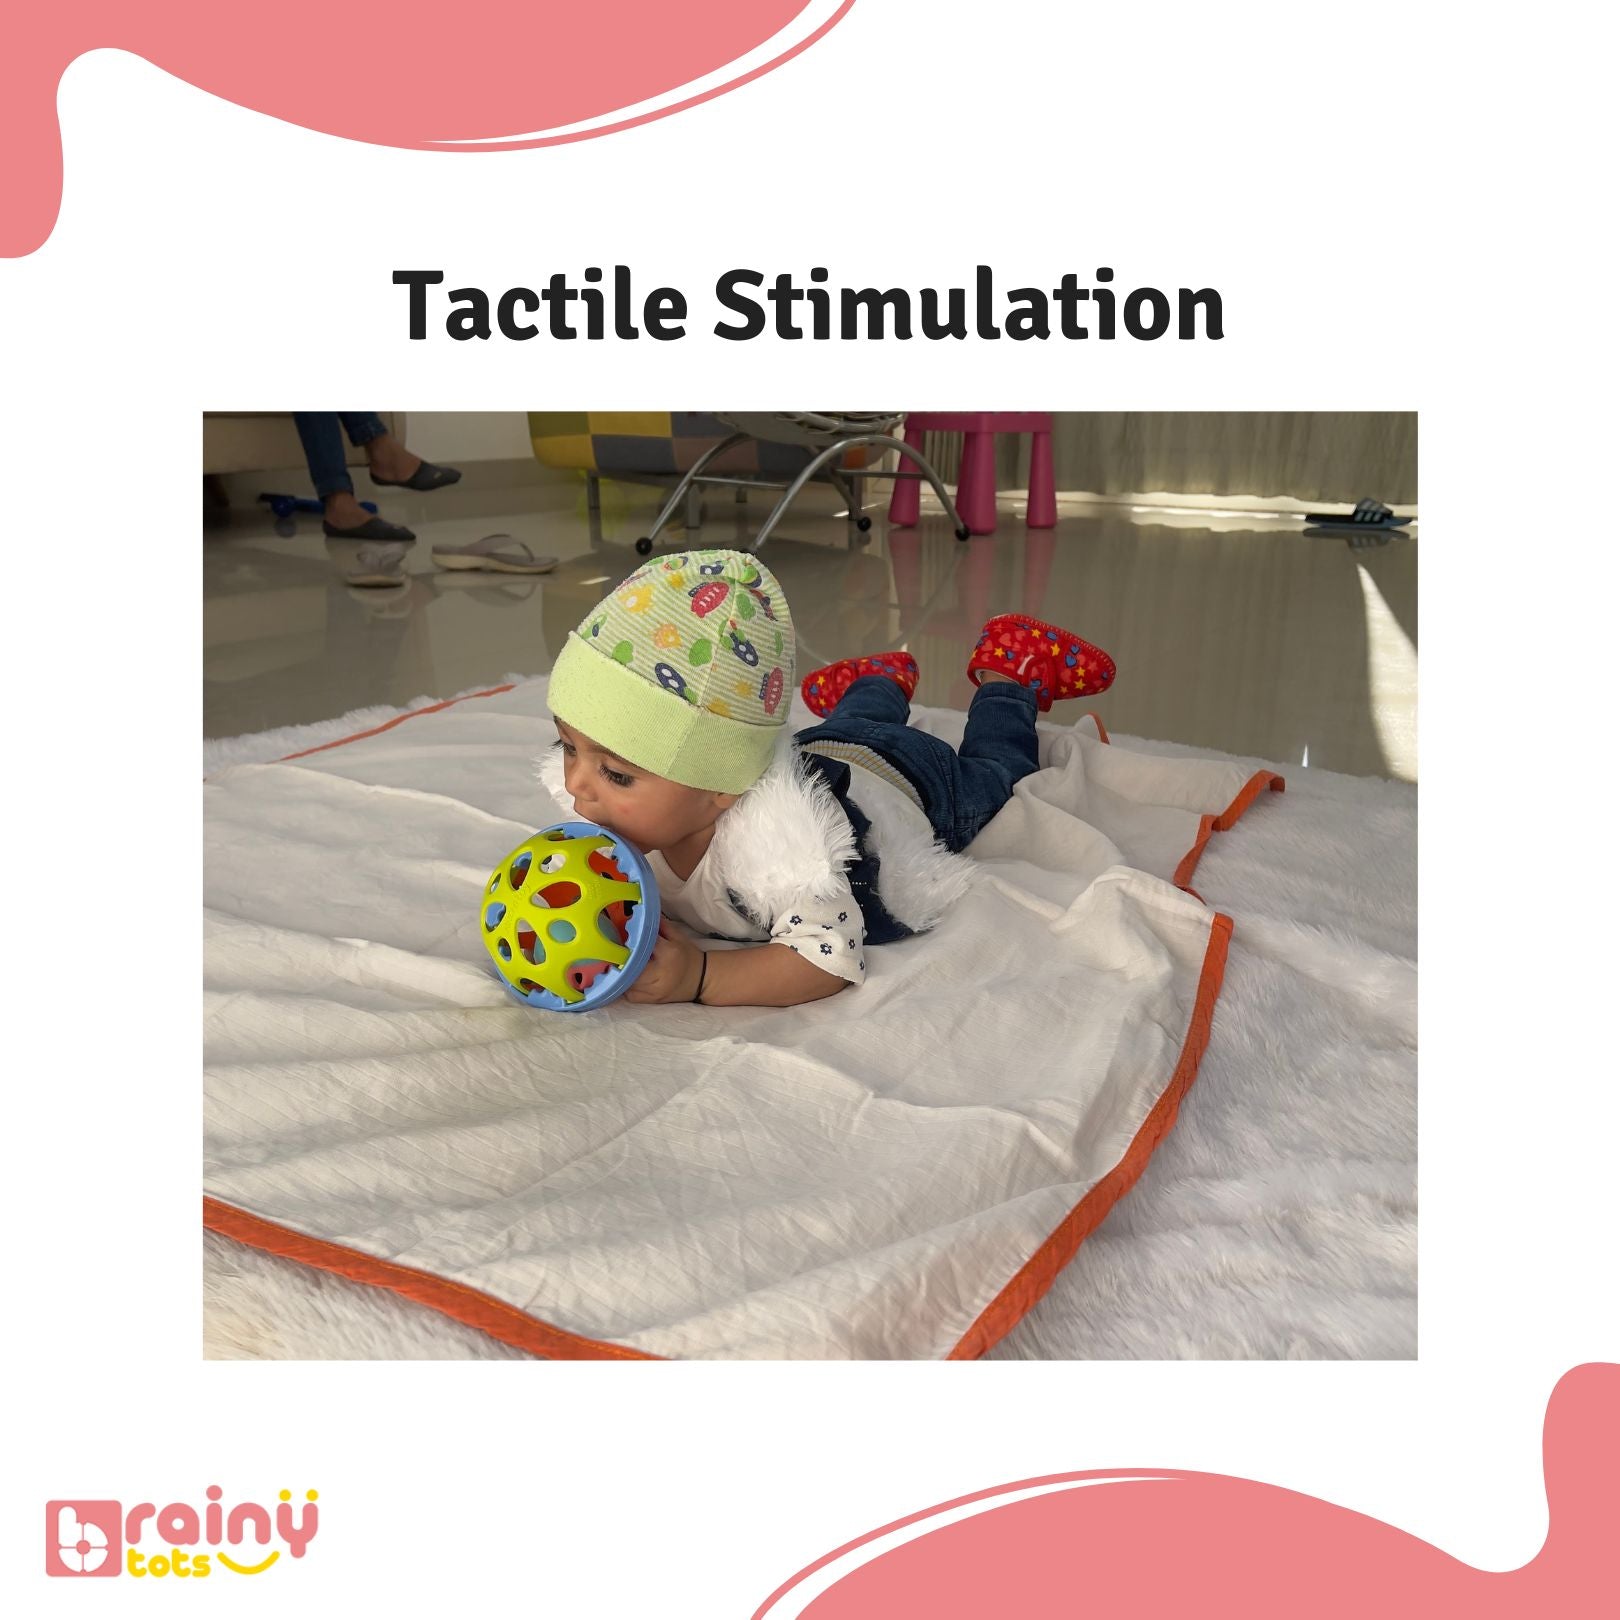 Promote tactile stimulation with our O Ball. Designed with textured surfaces and dynamic shapes, this sensory toy provides a stimulating experience for infants and young children, encouraging exploration and sensory development through touch and feel.